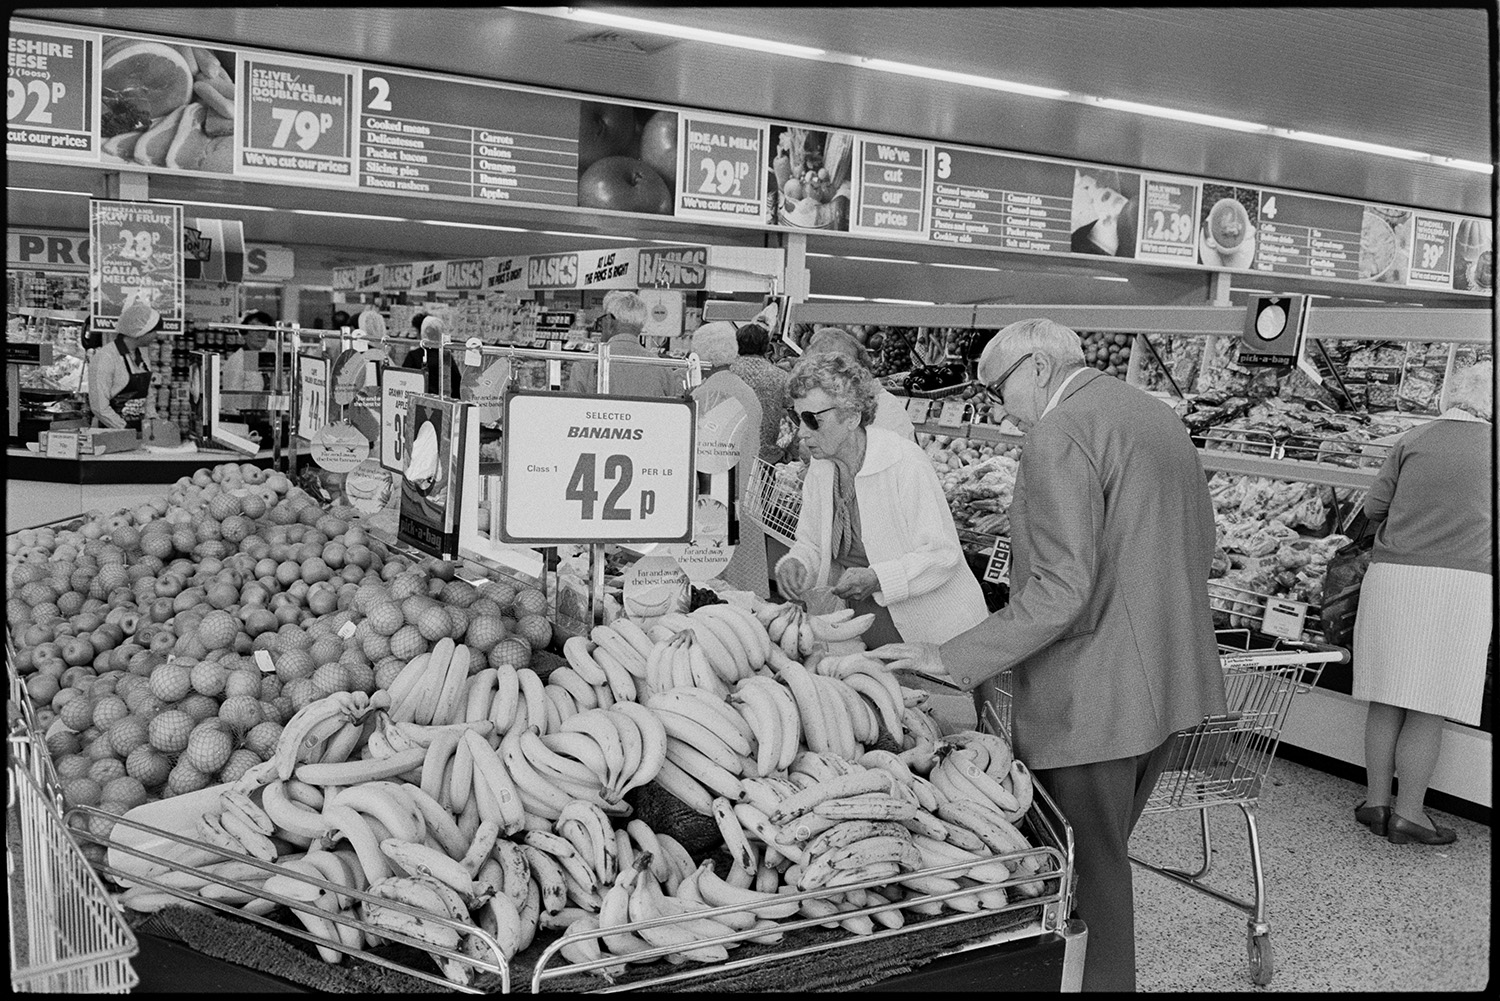 Interior of supermarket, people shopping, car park. Fruit, cash desk, check out.
[A man and a woman selecting bananas in Presto Food Market in Bideford and placing them in a shopping trolley. Other fruit is on display, including apples and oranges. There are a number of display boards showing details of products and prices.]